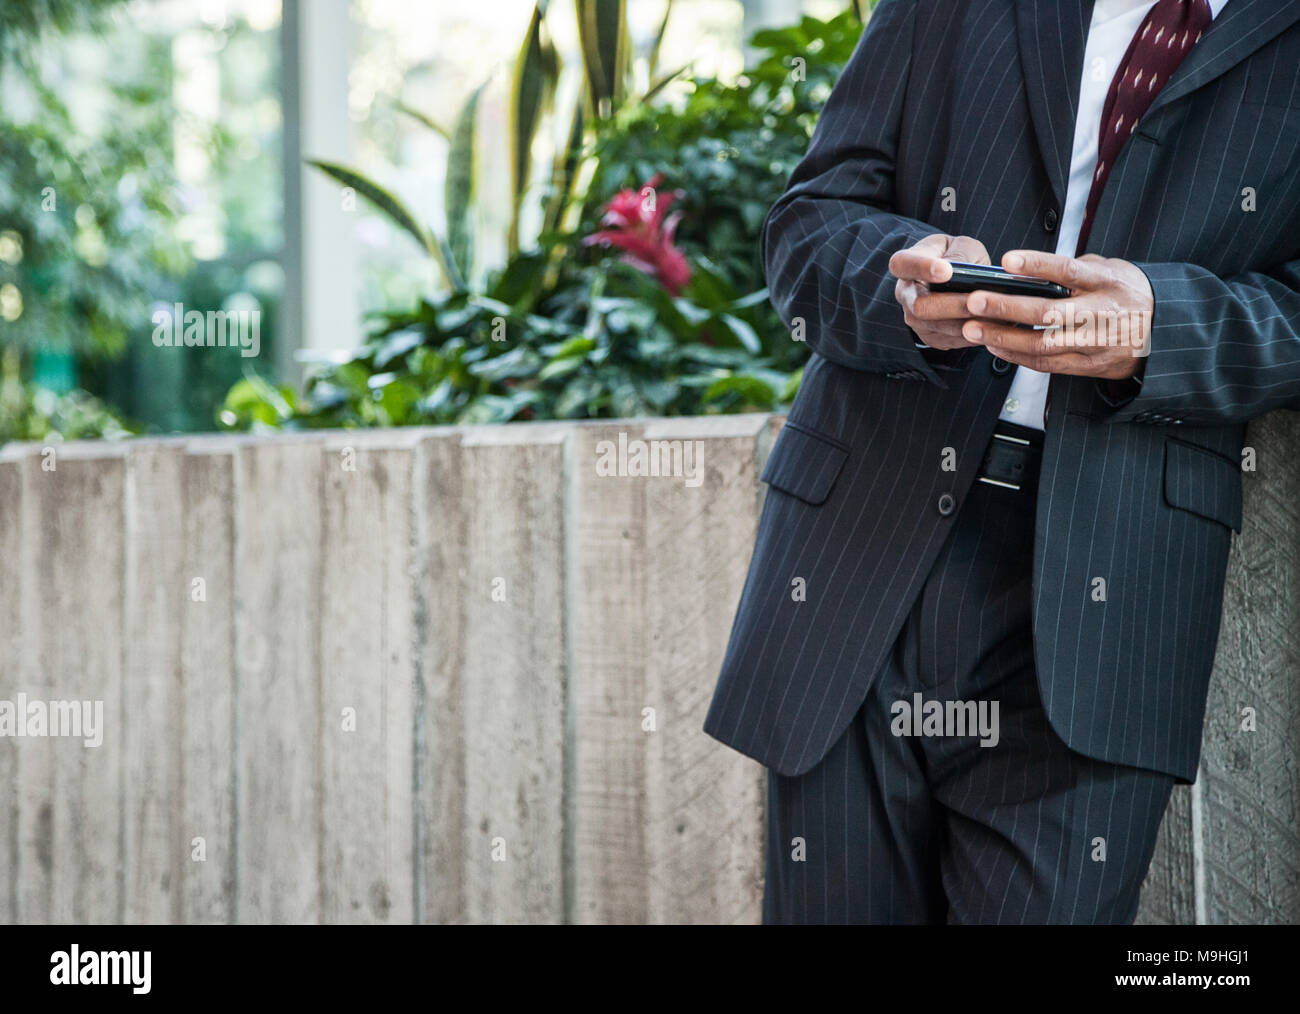 Close-up of a business man texing on a cell phone. Stock Photo